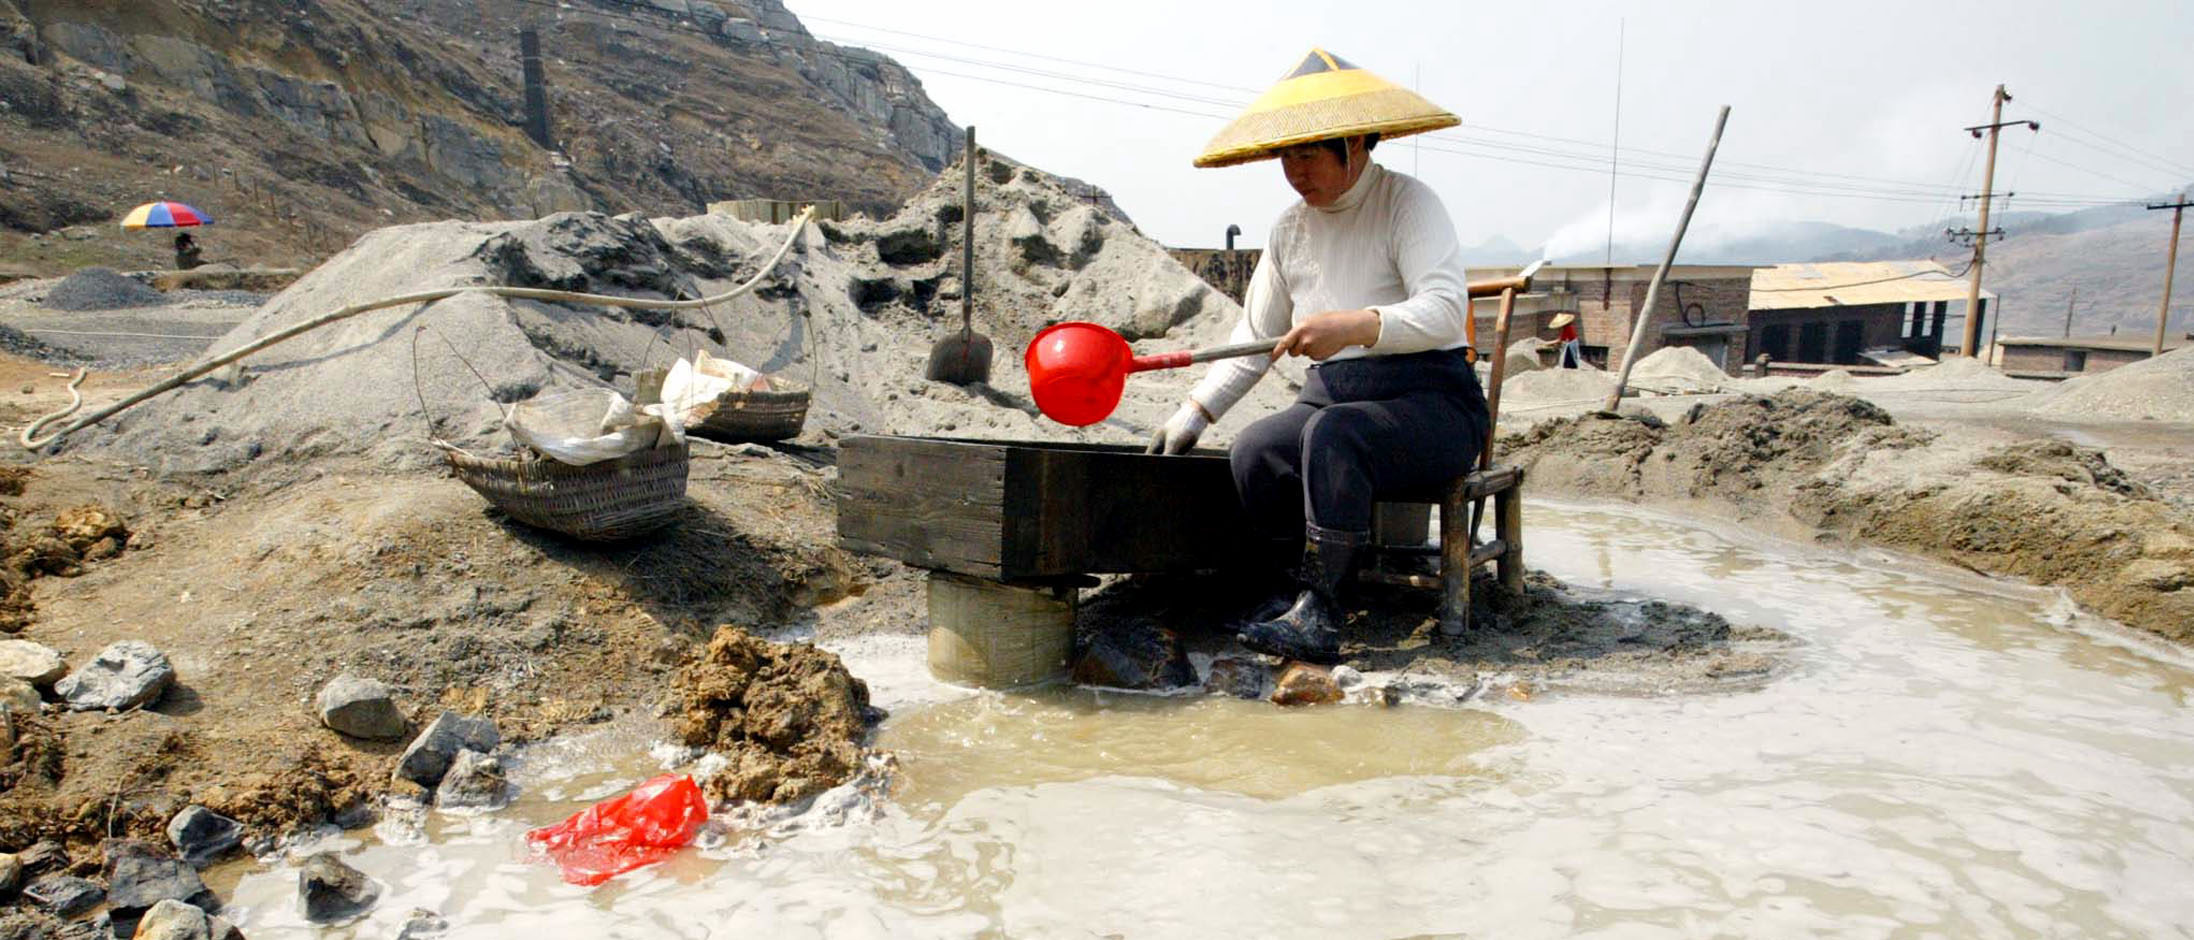 A Chinese villager sifts for antimony at an illegal mine at Lengshuijiang in China's southern province of Hunan August 10, 2003. The environment of Lengshuijiang has deteriorated to an alarming level due to indiscriminate and illegal mining. Antimony was first discovered in Lengshuijiang about 500 years ago and since then the area has developed into probably the world's biggest mining area of antimony, which is widely used in semiconductor technology. (REUTERS/China Photo)